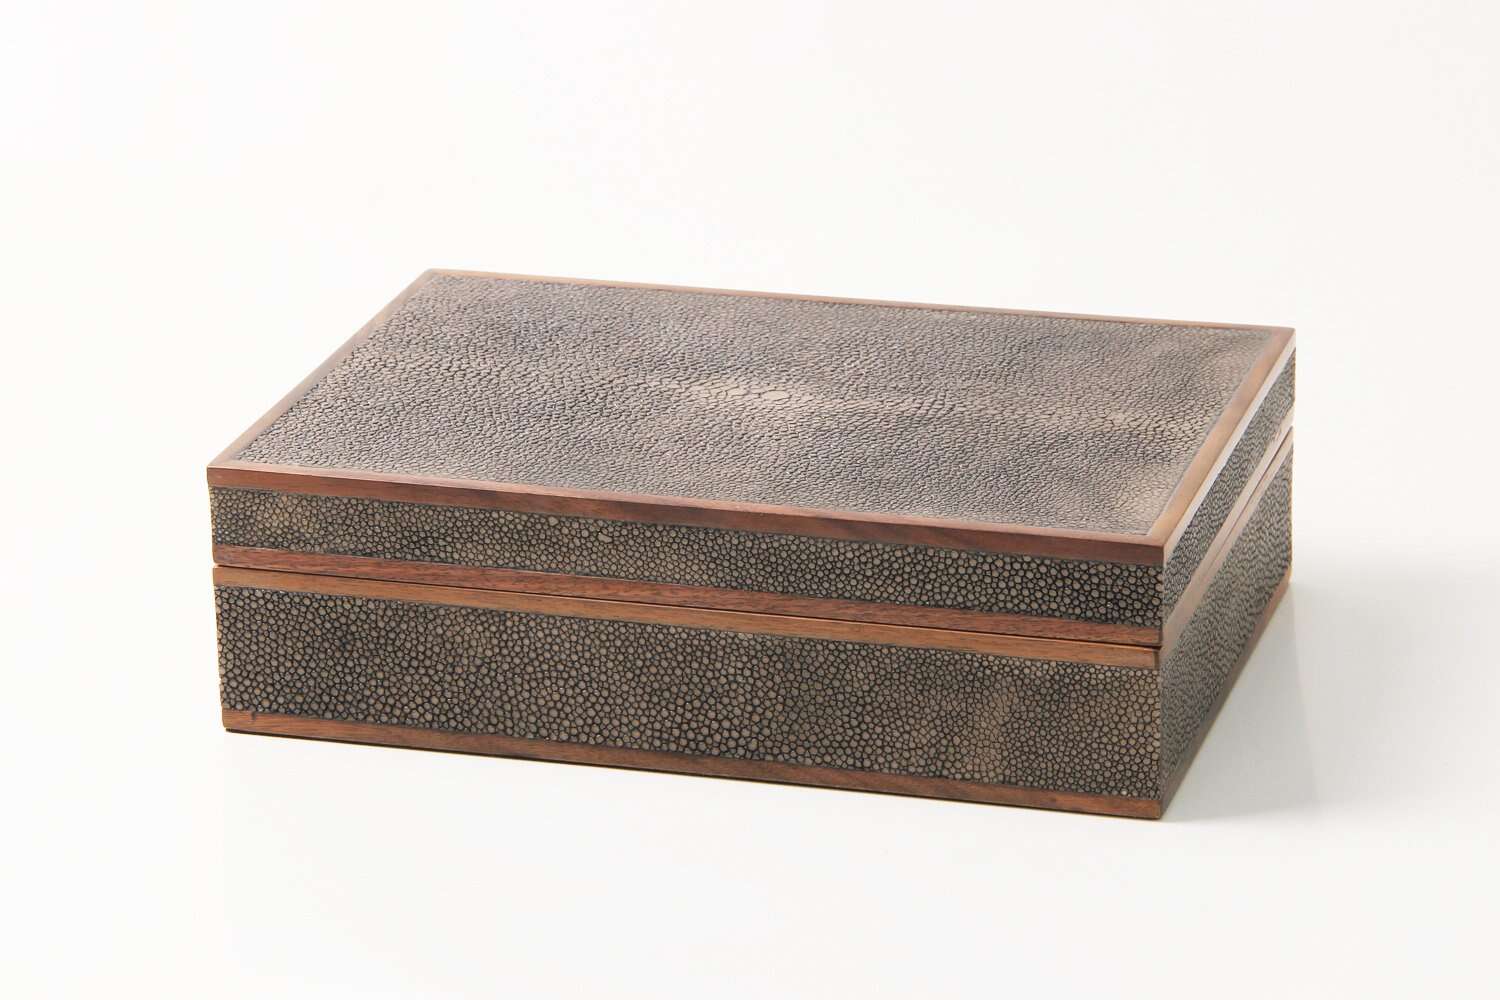 Gorgeous jewelry box in faux shagreen